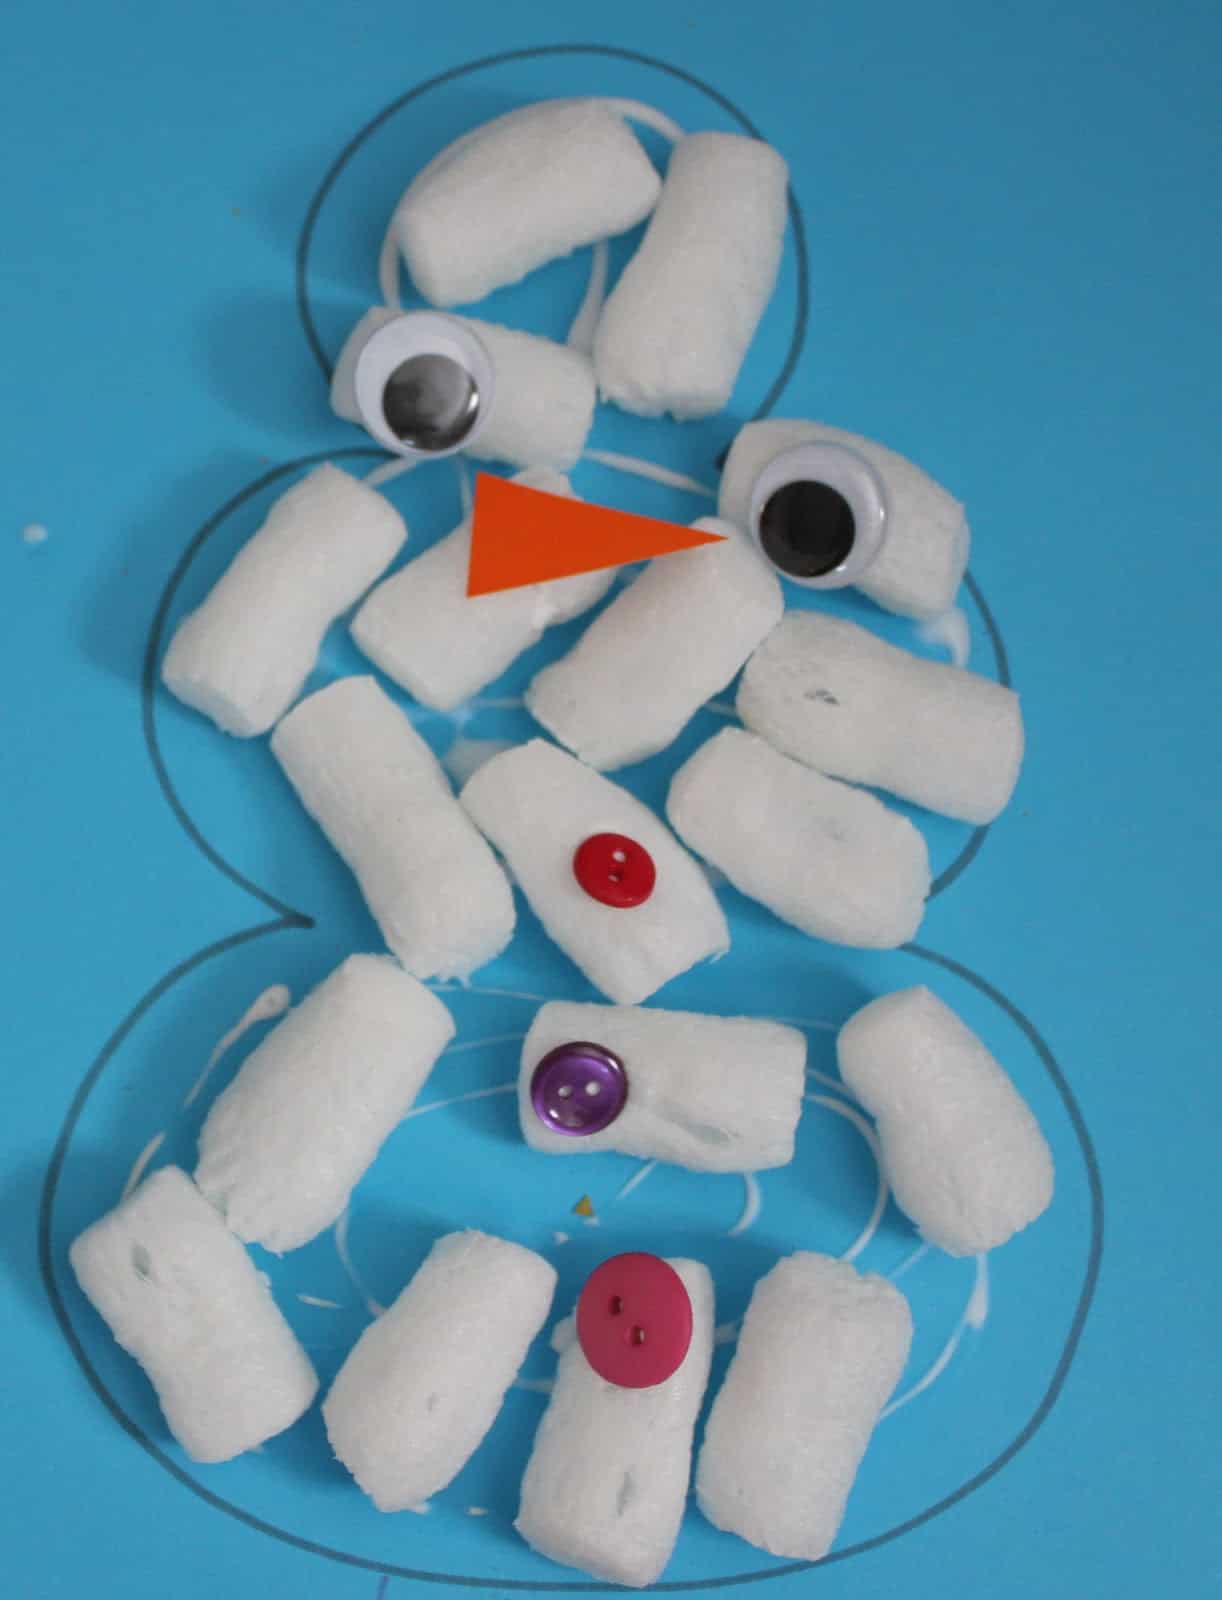 Fun-To-Make Peanuts snowman Crafts Idea For Toddlers Winter Craft Activities for Toddlers or 3 Year Old